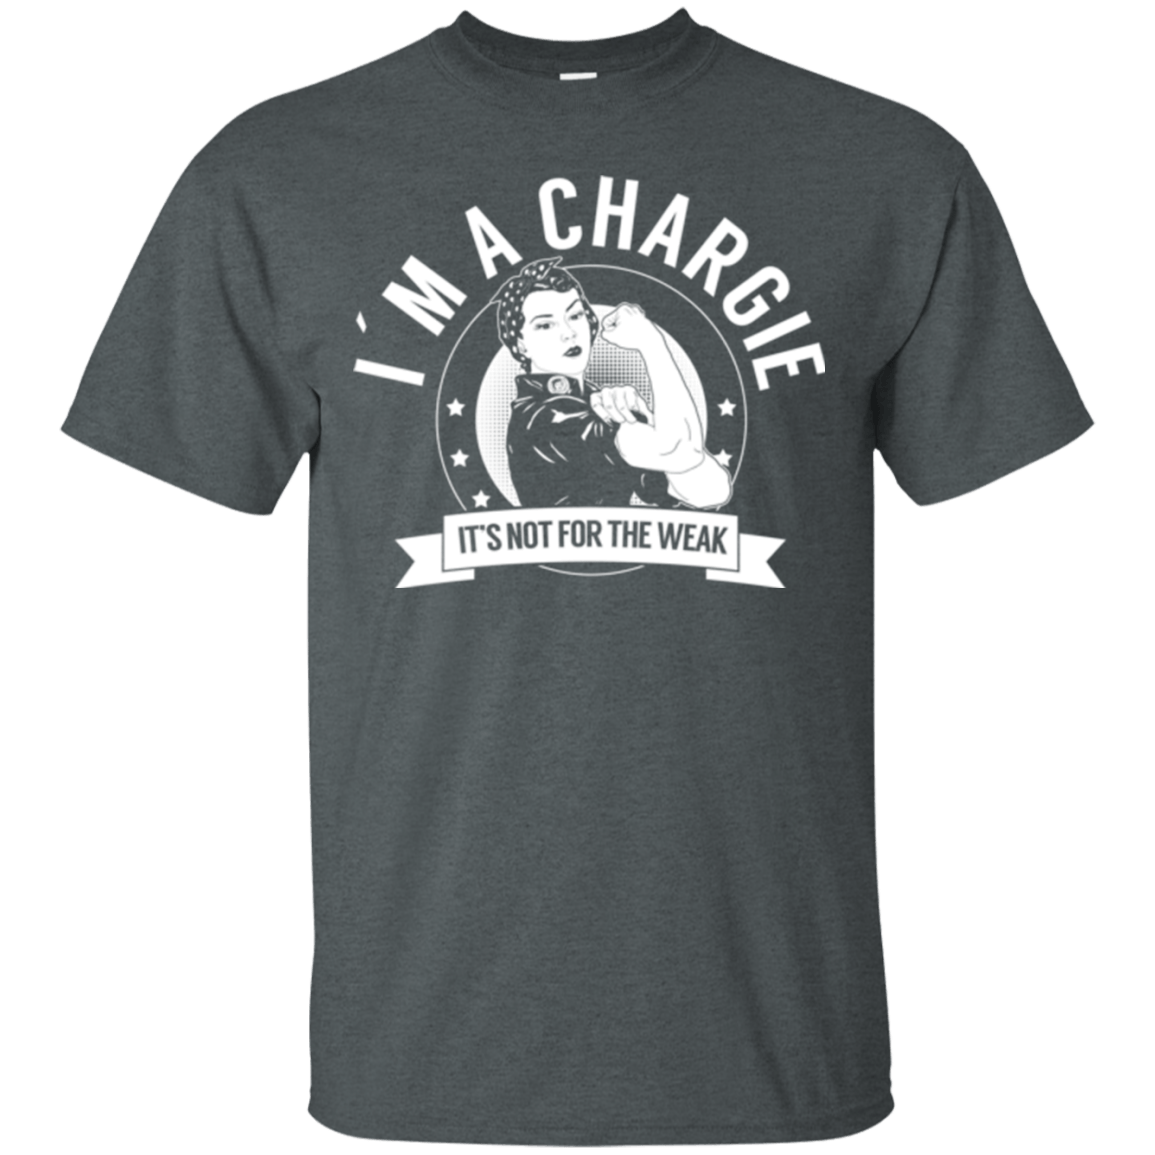 Chargie Not For The Weak Unisex Shirt - The Unchargeables